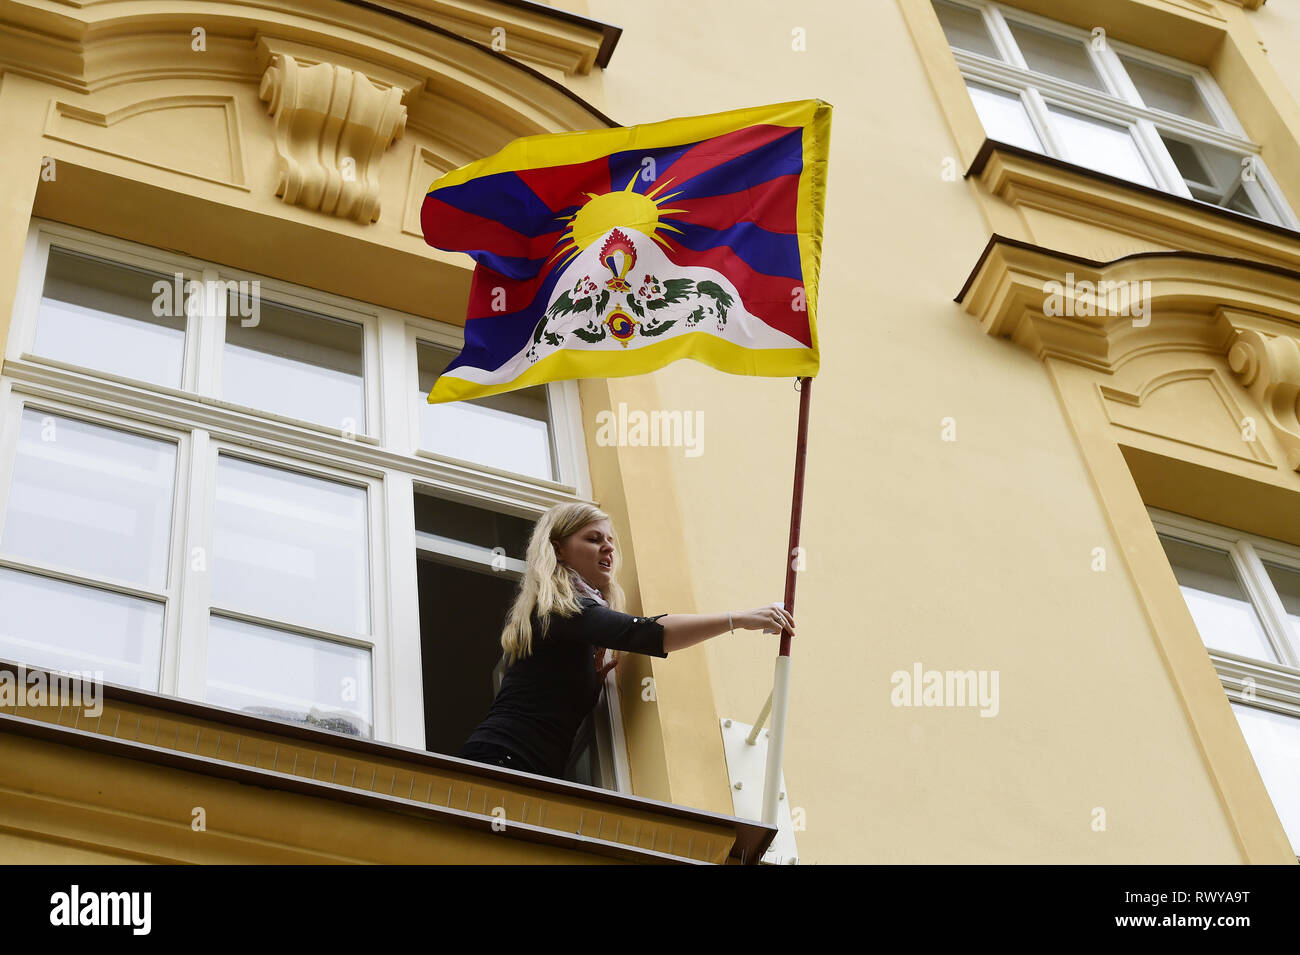 Olomouc, Czech Republic. 08th Mar, 2019. Hana Ferencova, member of Department of History of Palacky University Olomouc, hang up the Tibetan flag on the building of Faculty of Philosophy, in Olomouc, Czech Republic, on March 8, 2019, as a symbolic reminder of the anti-Chinese uprising in 1959. Credit: Ludek Perina/CTK Photo/Alamy Live News Stock Photo